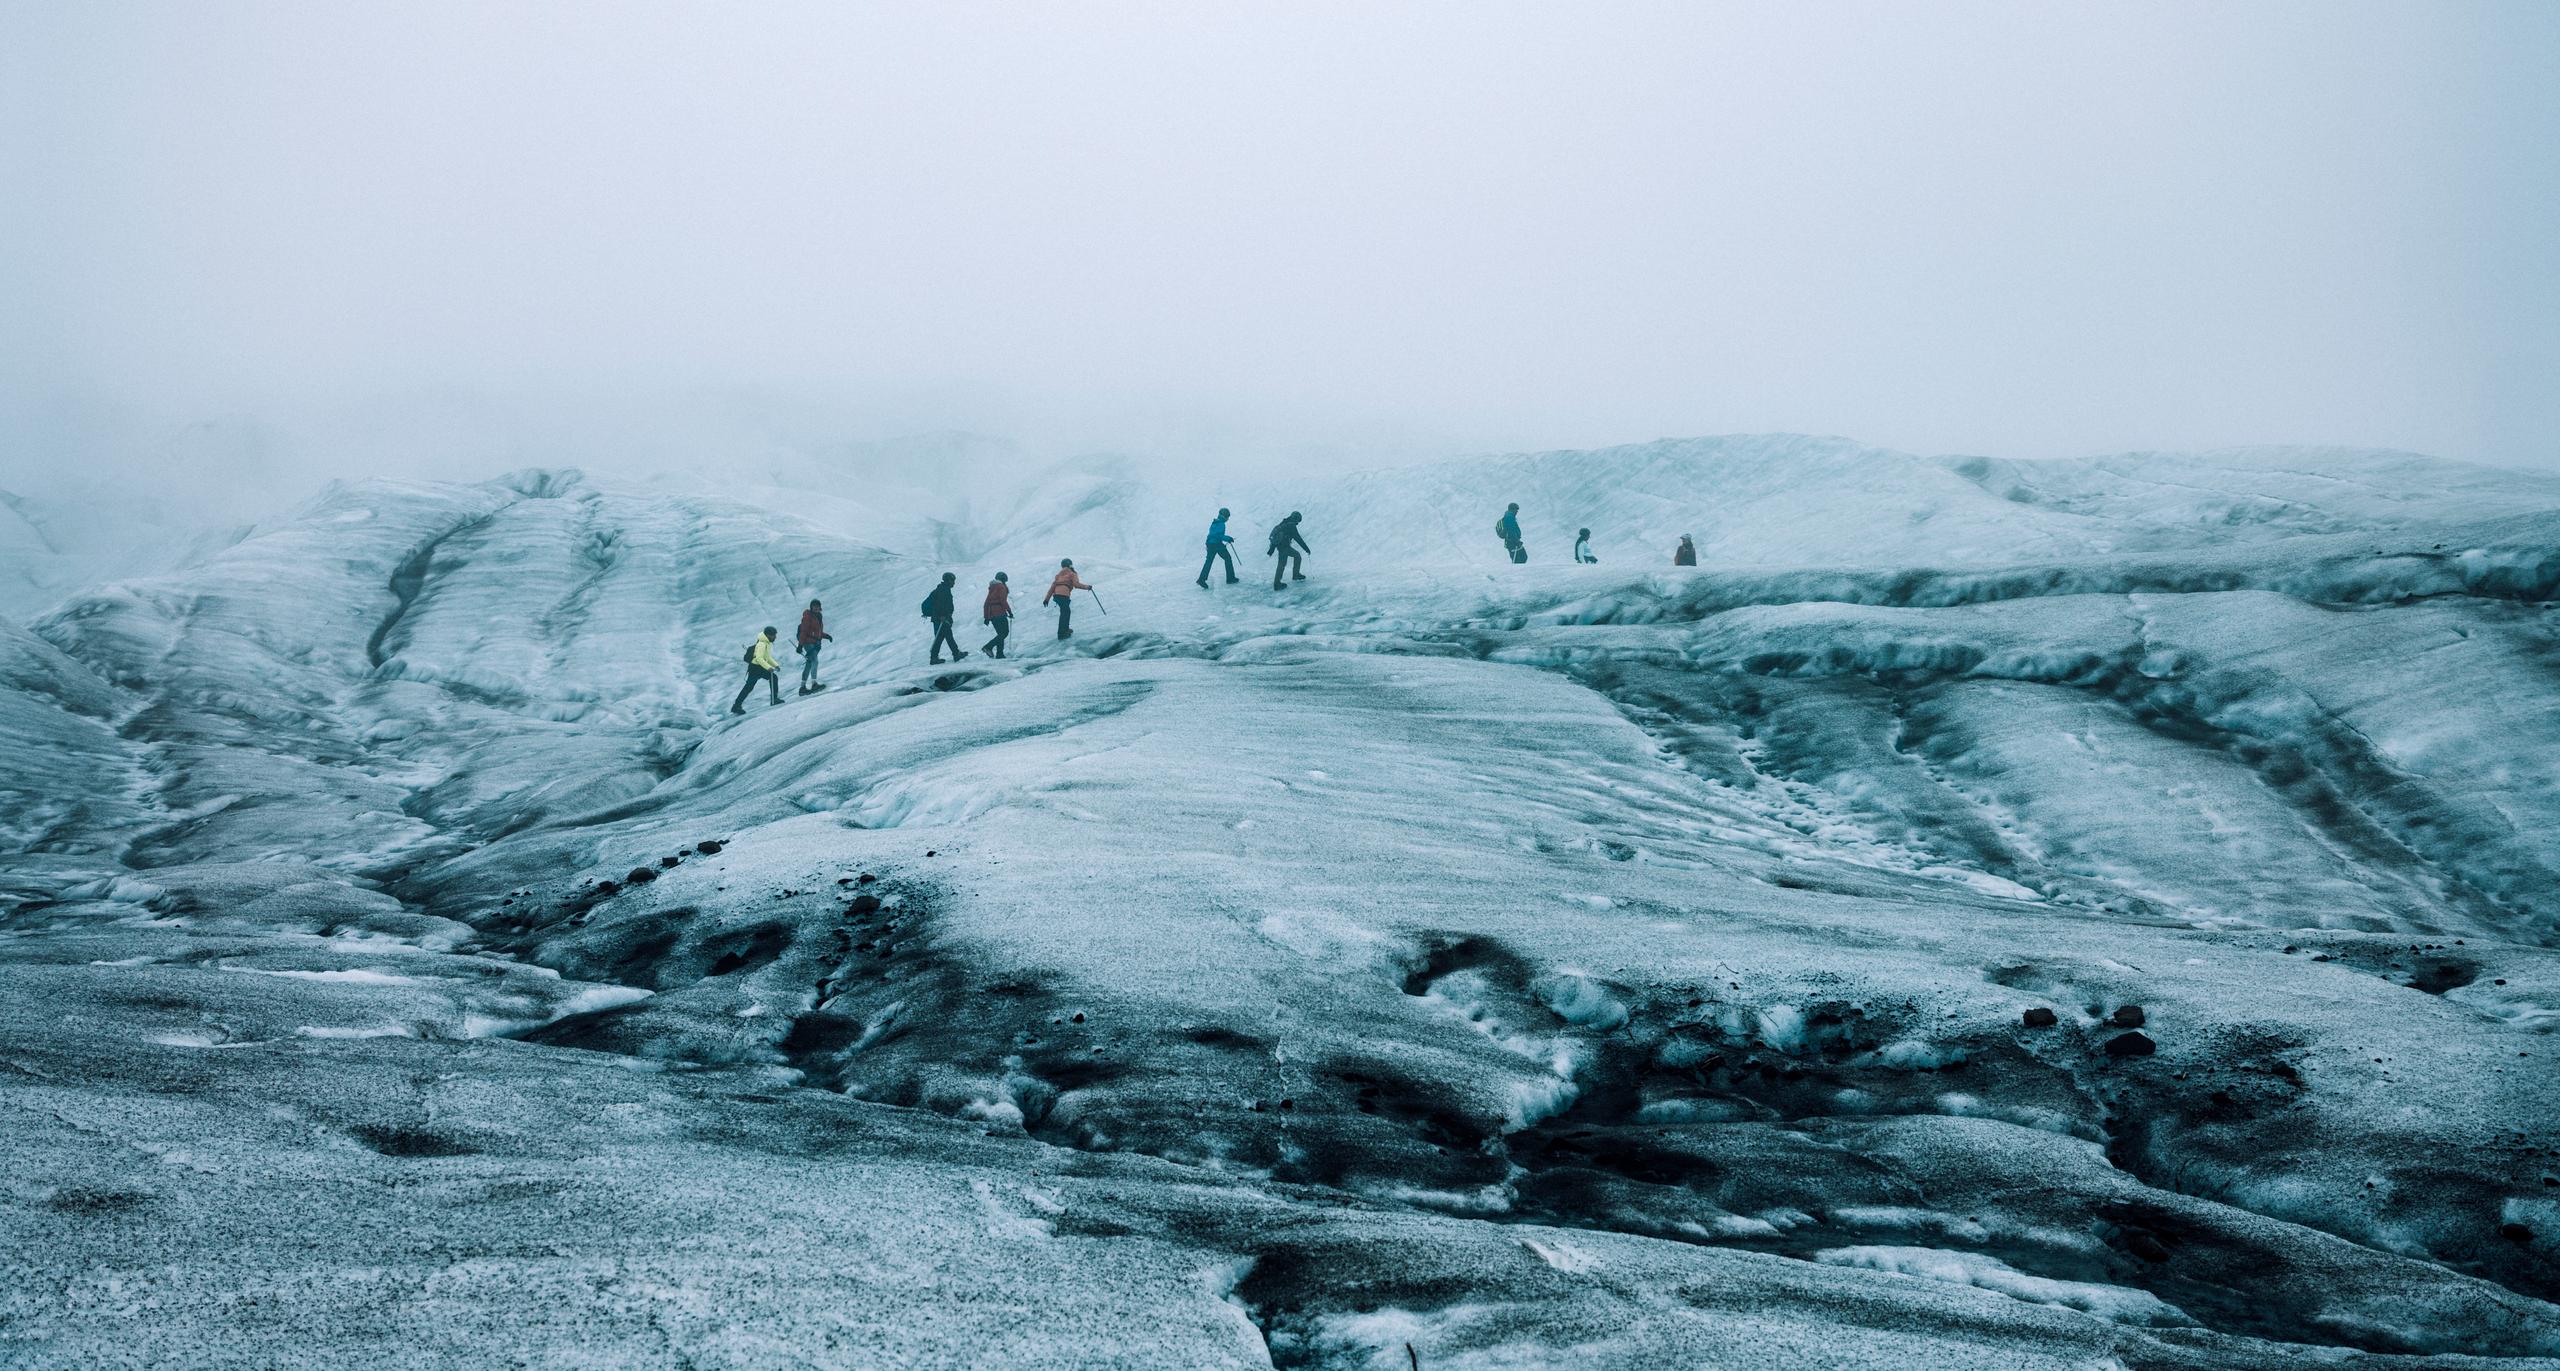 People hiking on glacier in Iceland.